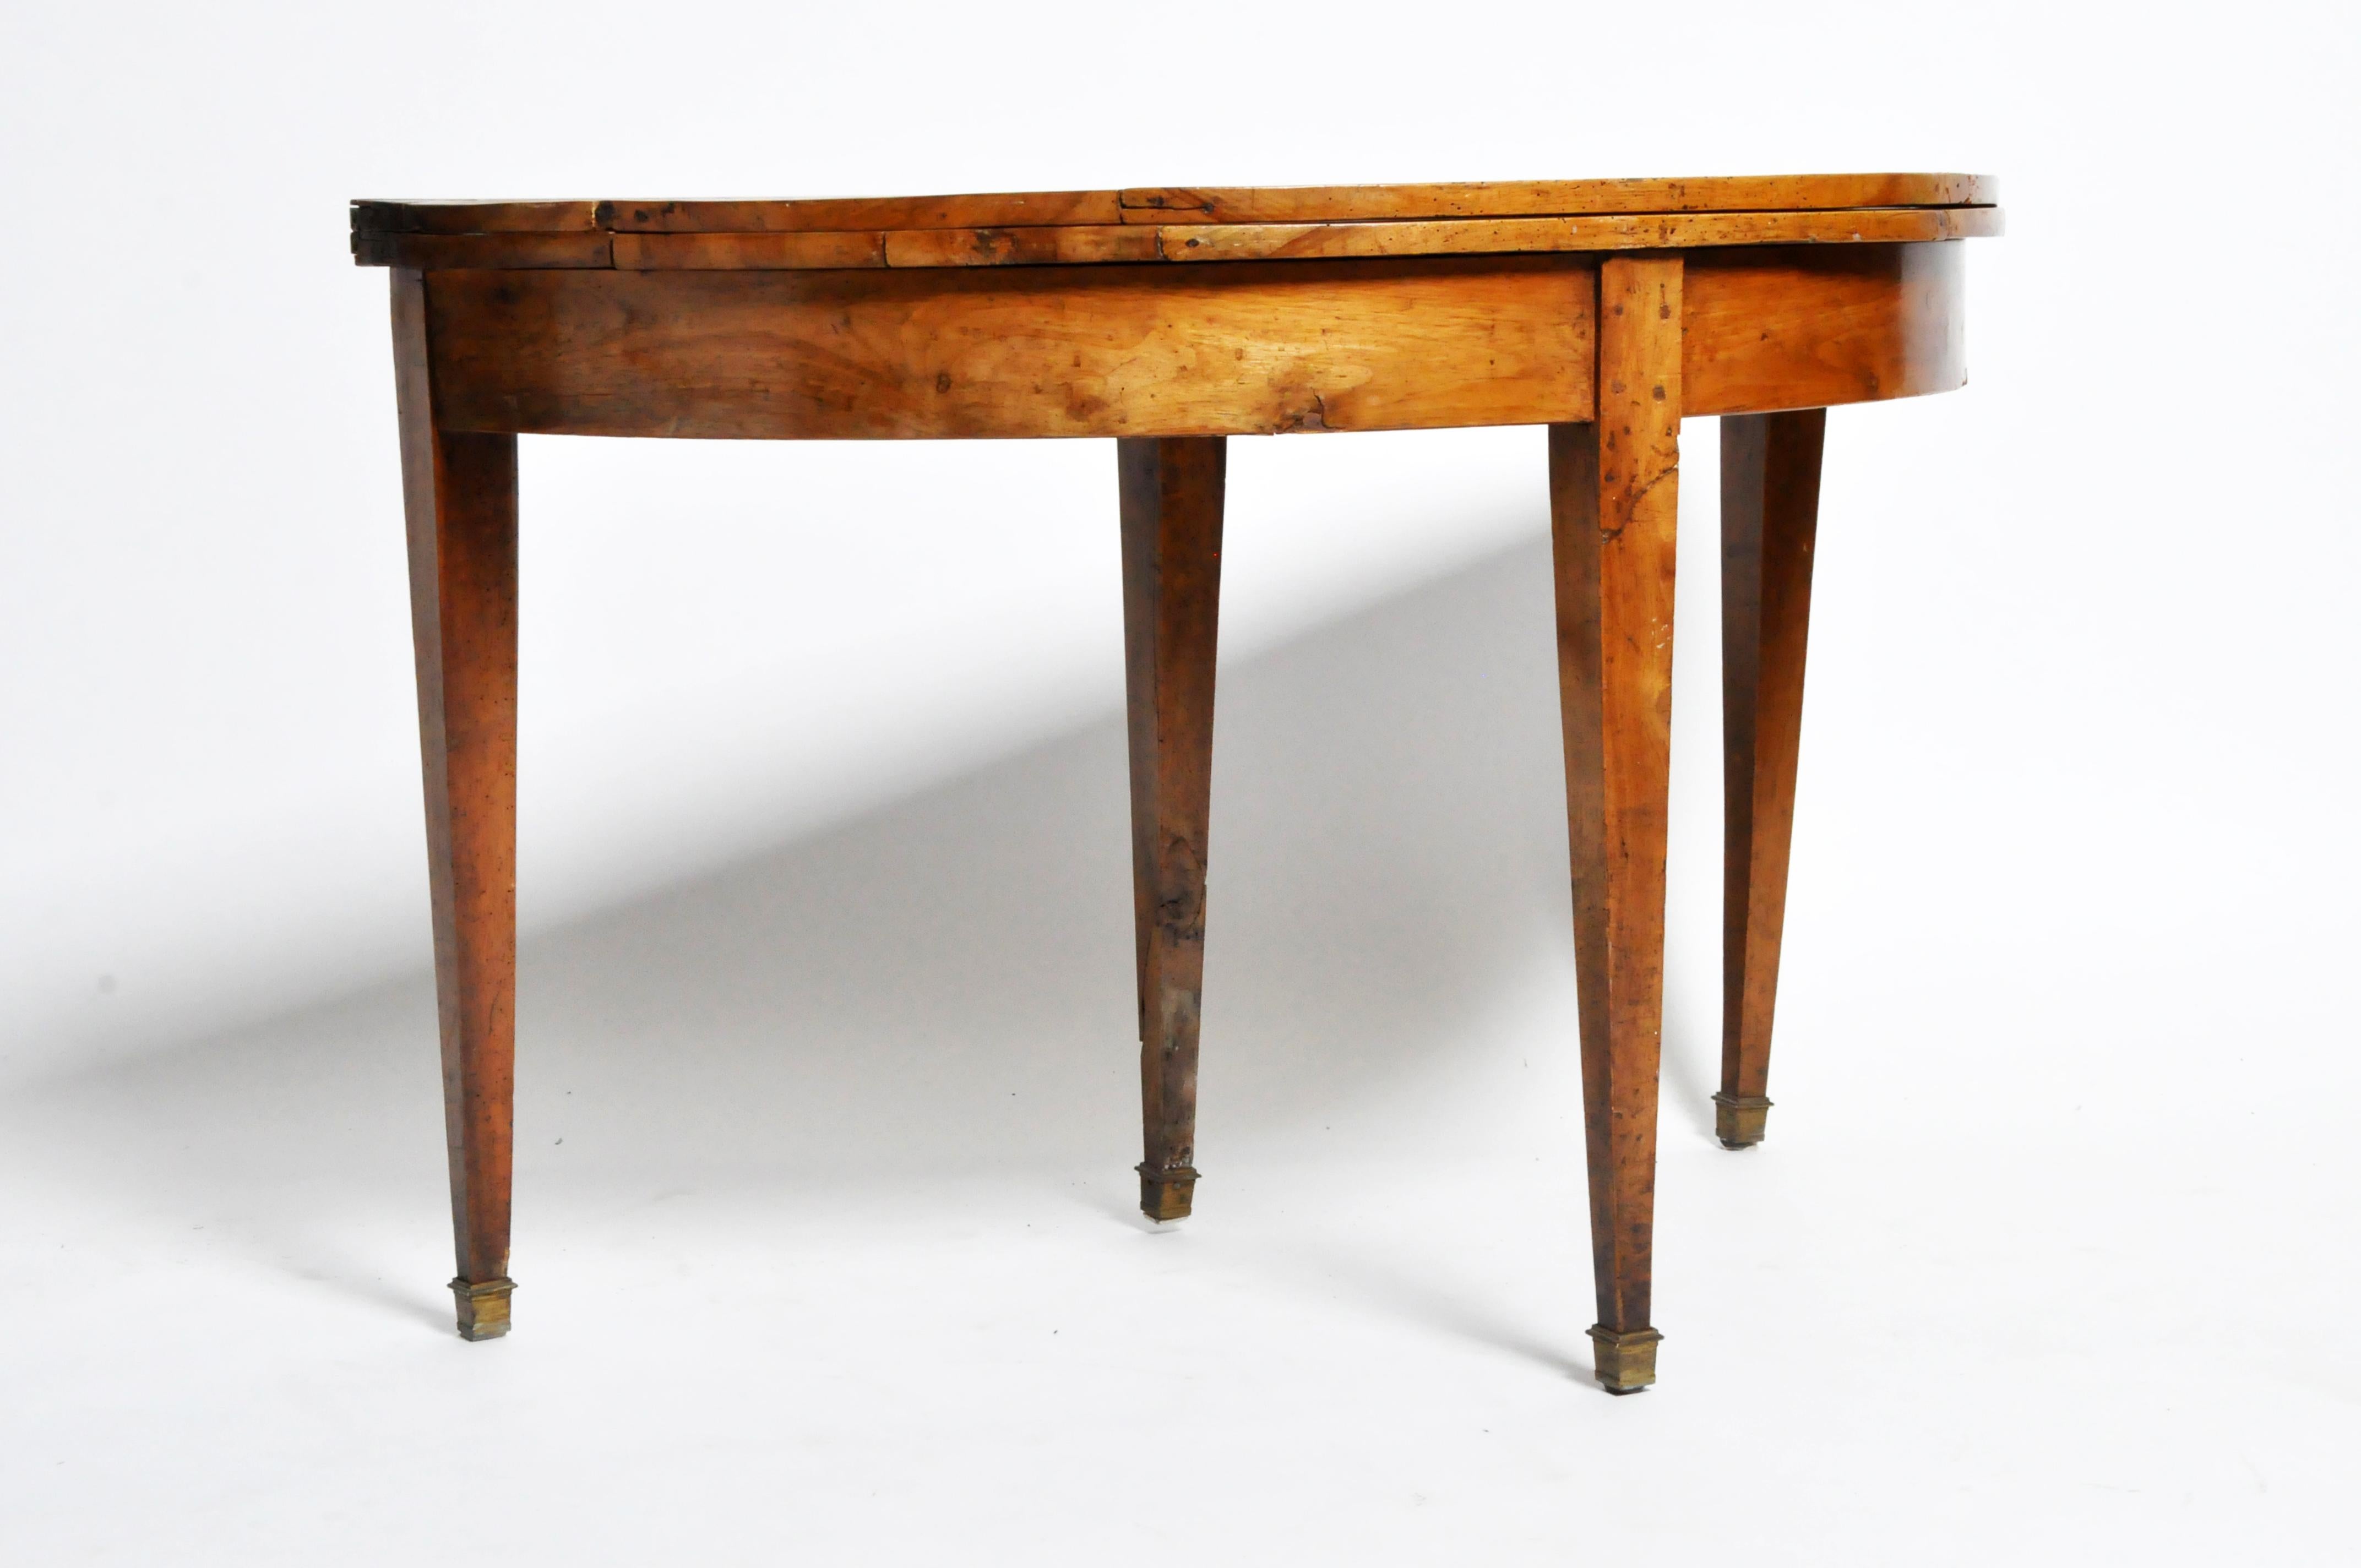 This demilune folding game table is from France and dates to the 19th century, circa 1850. The table opens up to form a circular table to seat additional people, probably for playing cards. The table is unusually simple, with the only explicit